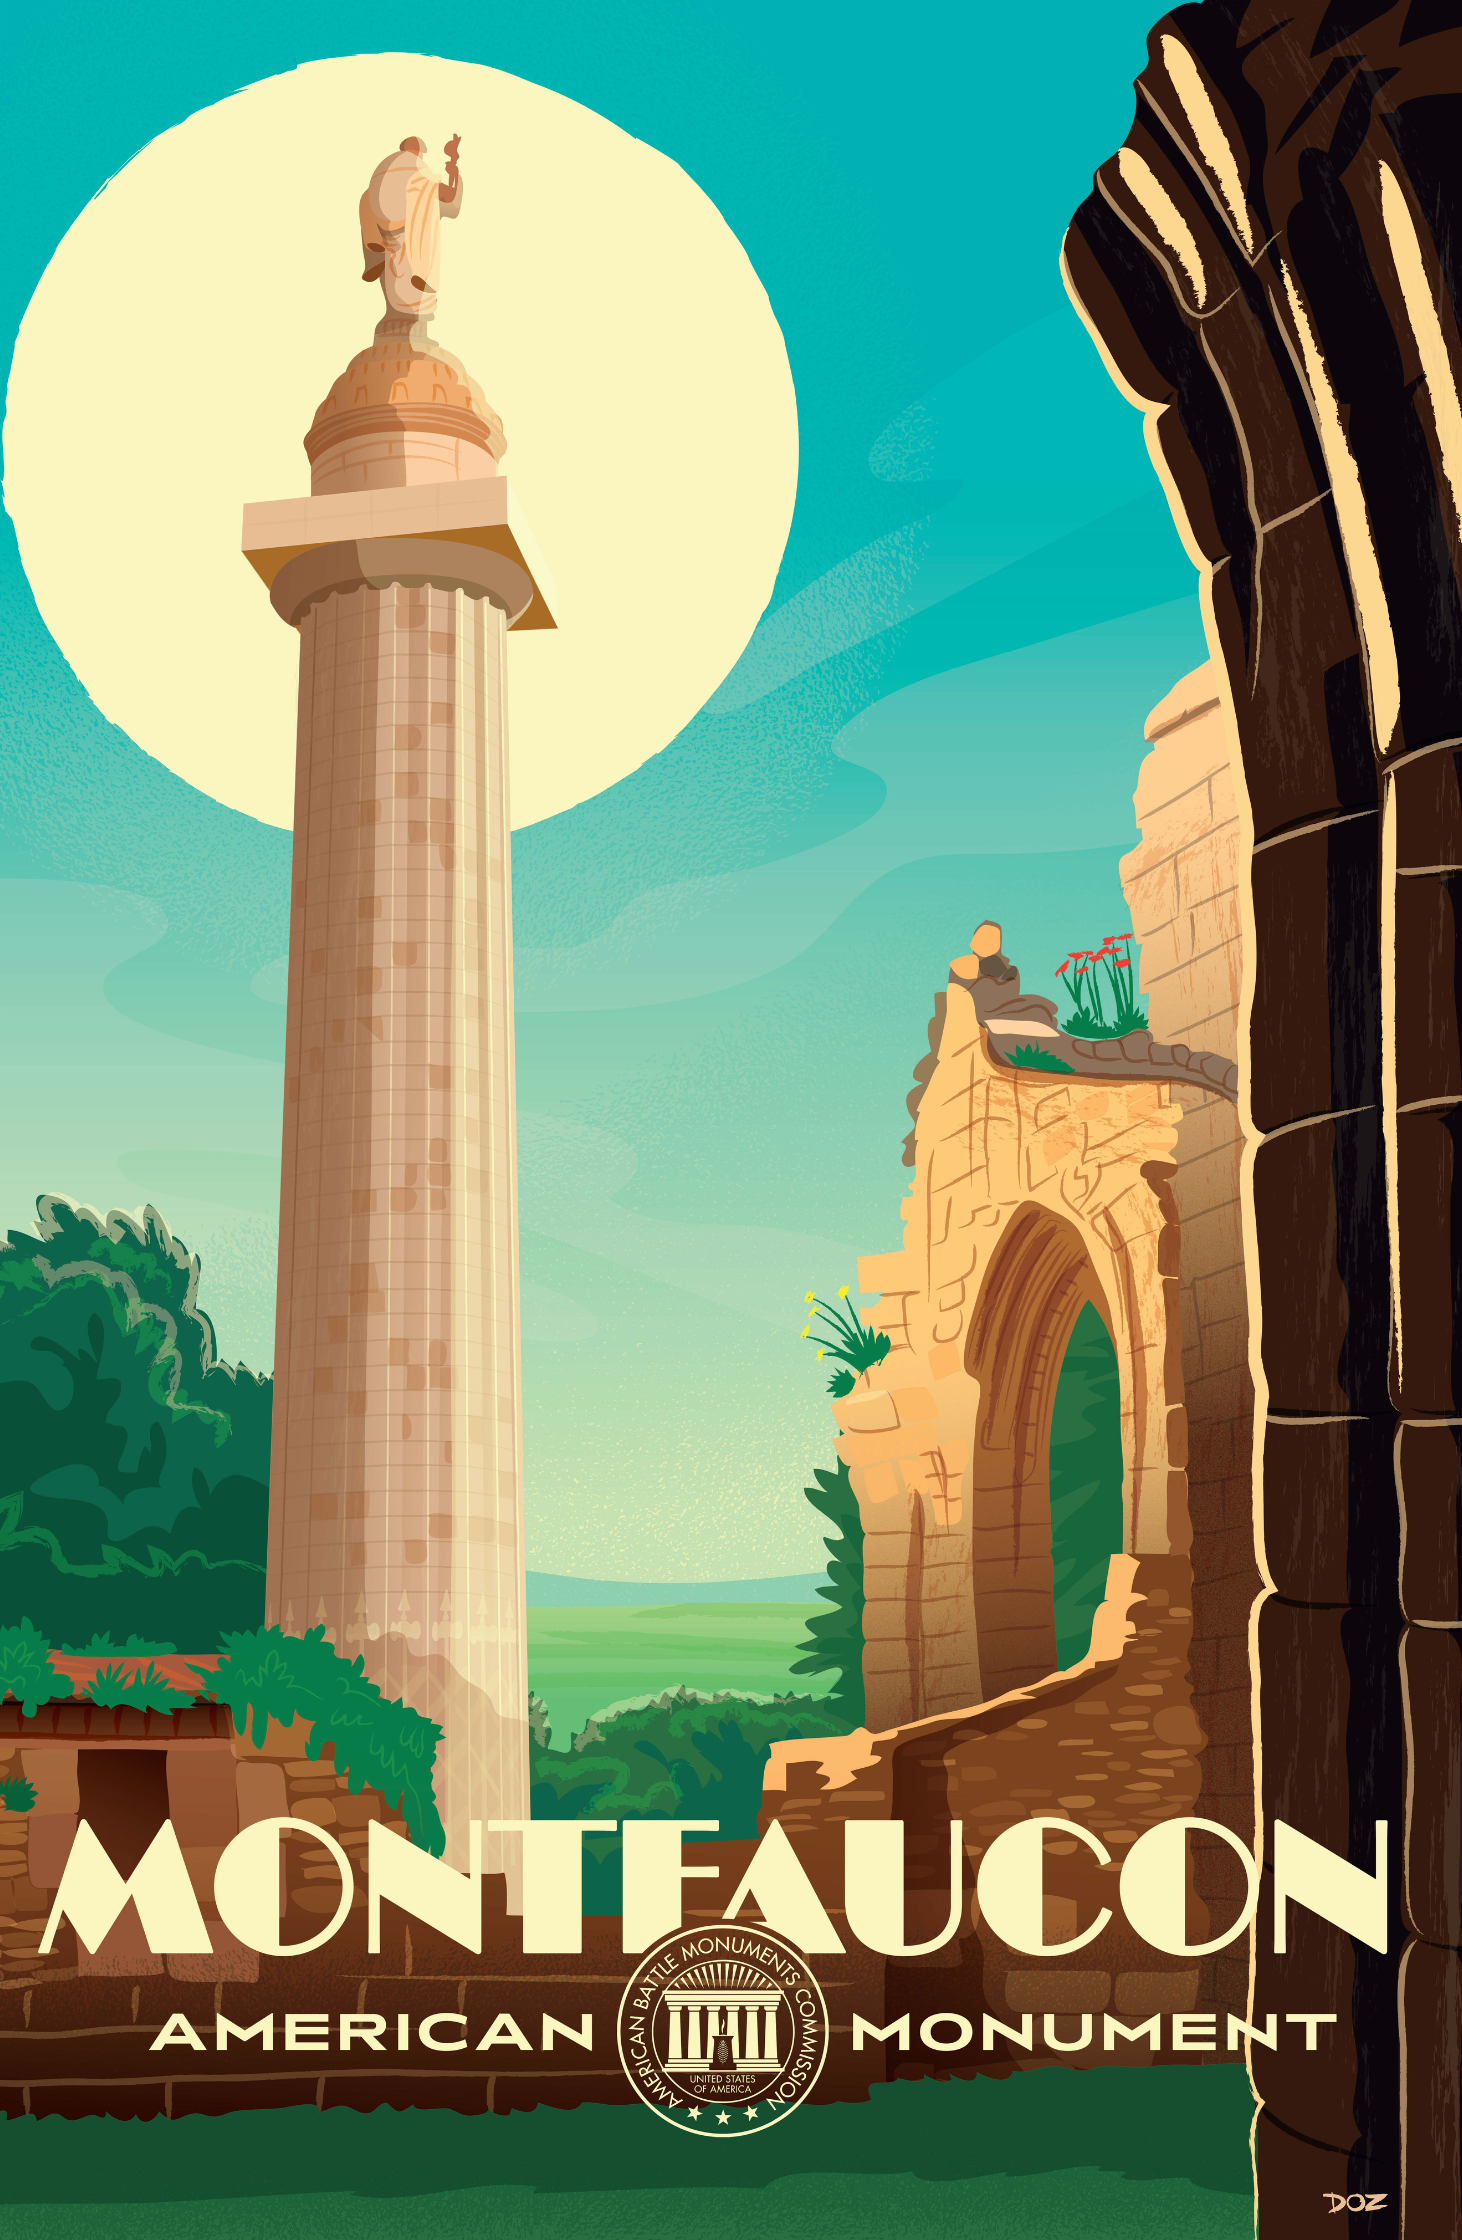 Vintage poster of Montfaucon American Monument created to mark ABMC Centennial